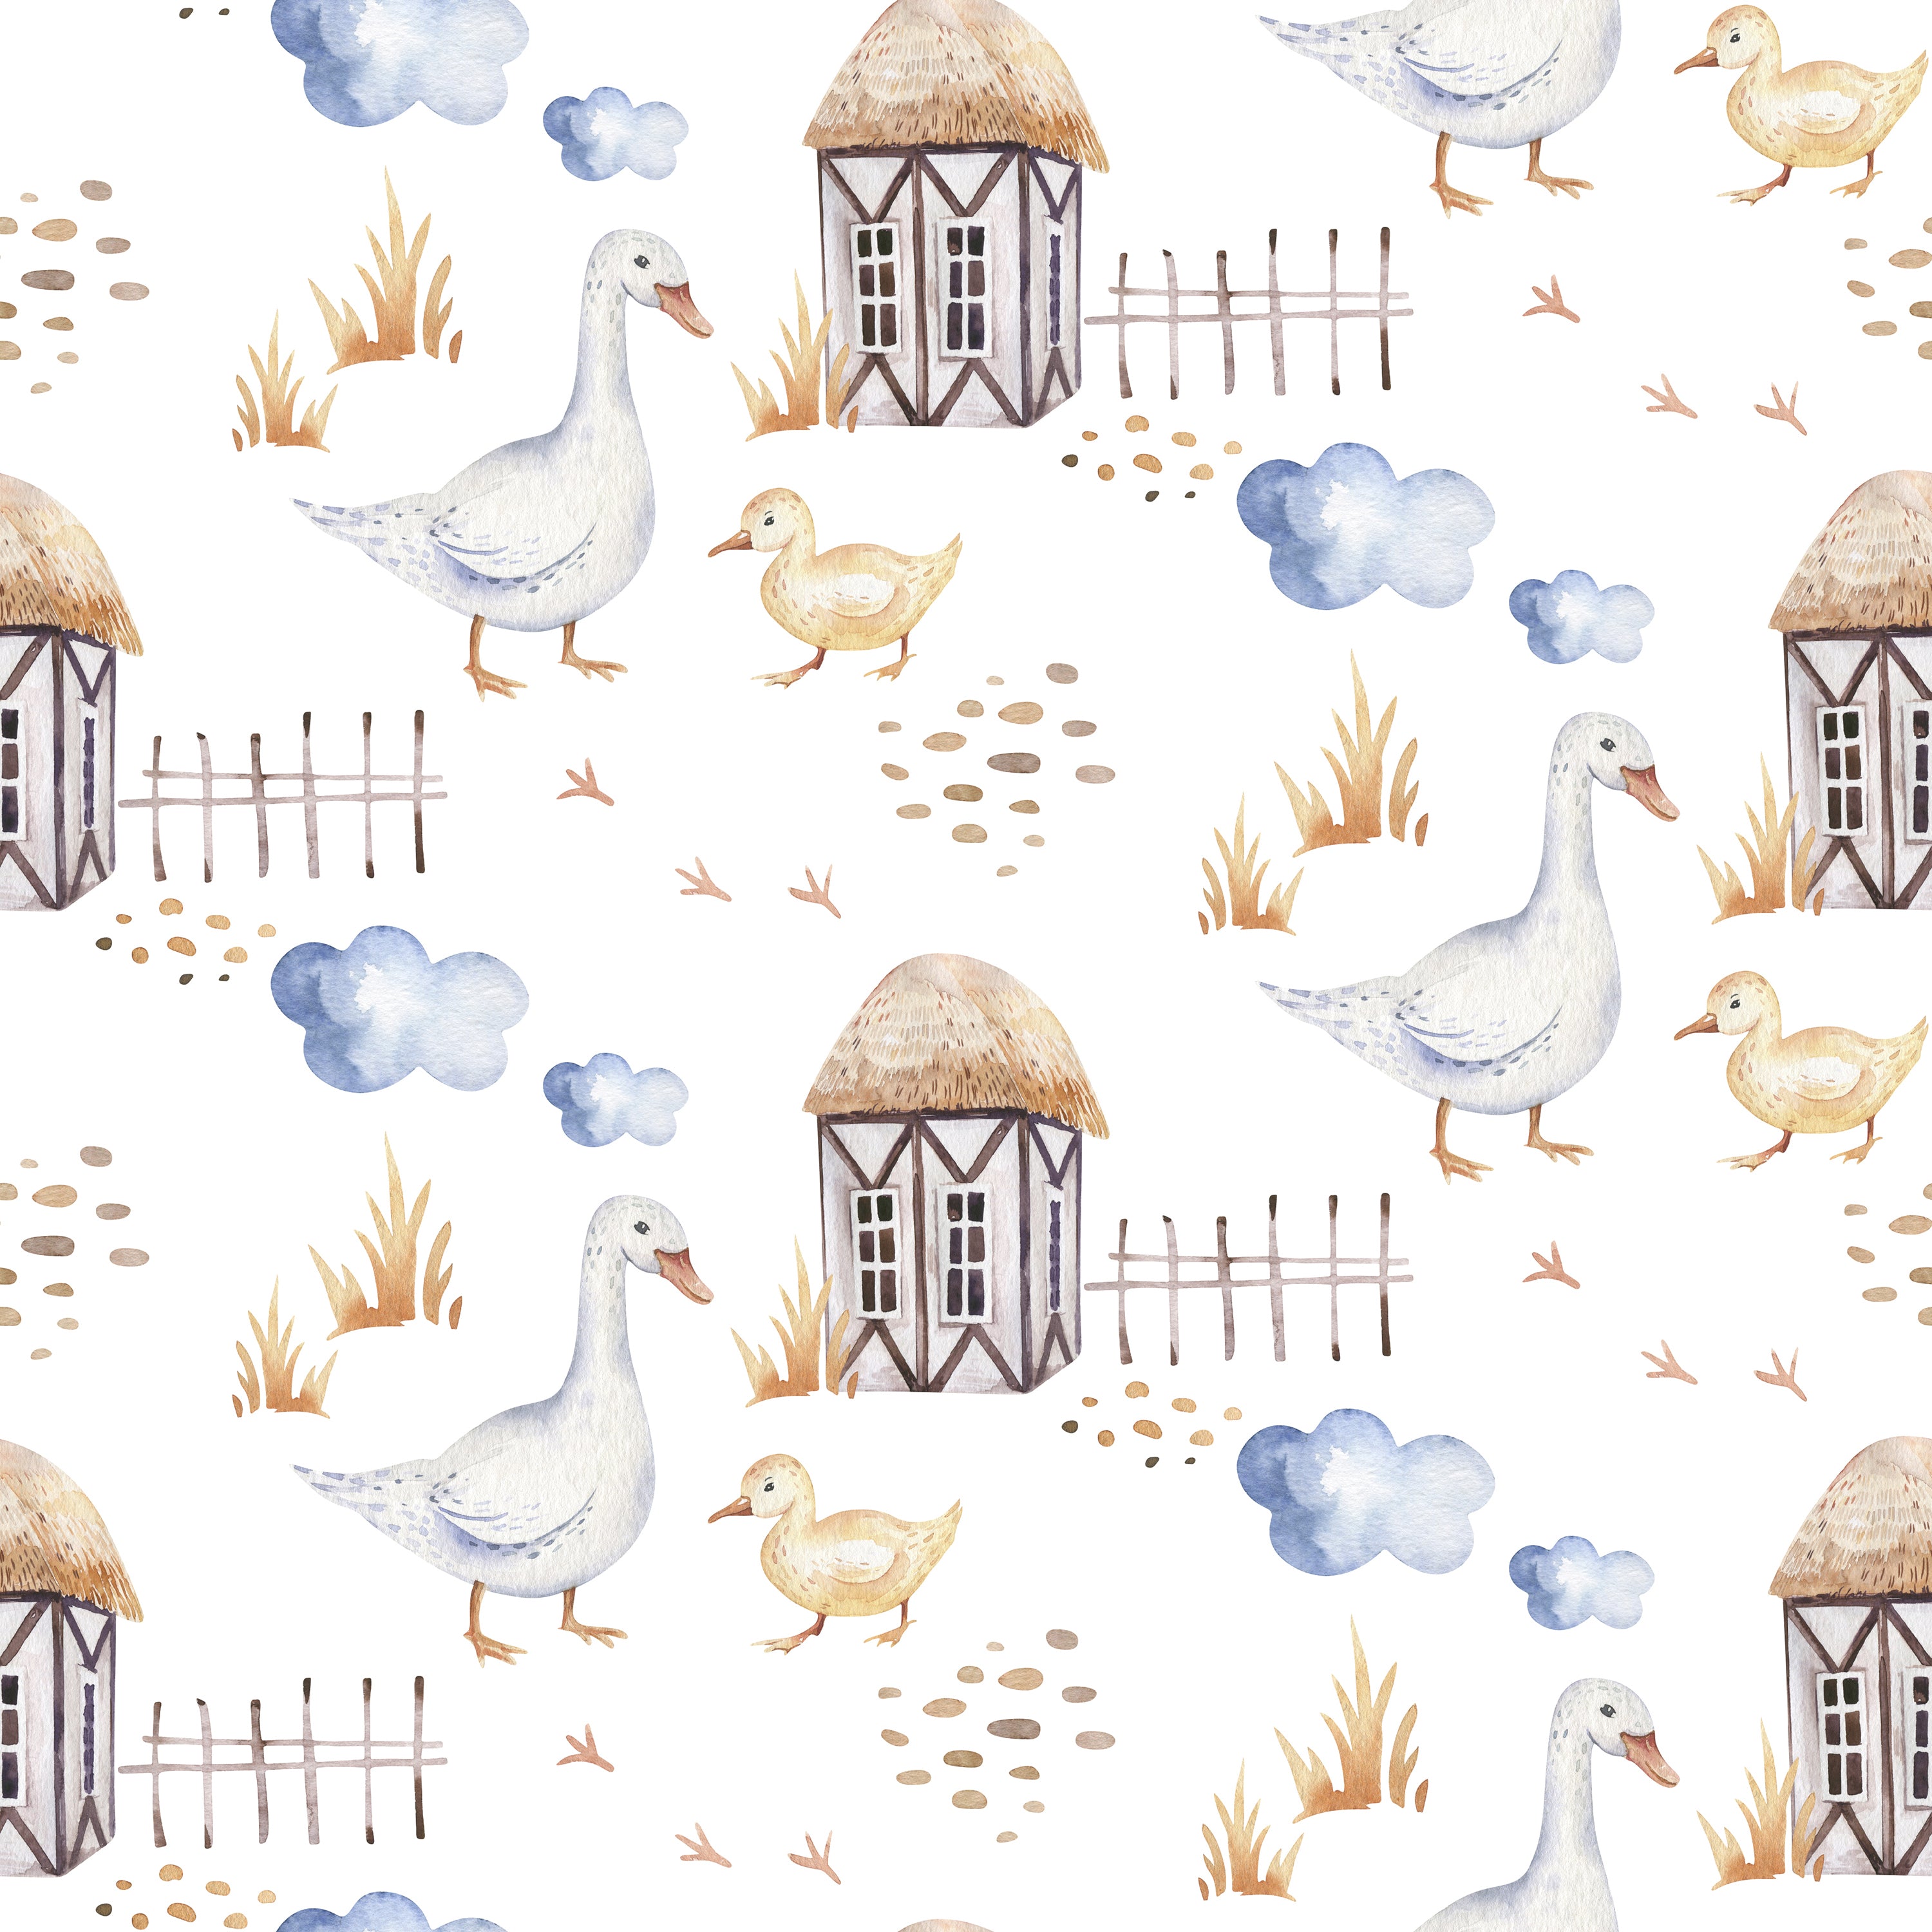 Charming 'Watercolor Farm Animals VI' wallpaper featuring a bucolic scene with watercolor geese, chicks, and rustic farmhouses amidst tufts of grass and floating clouds, set on a white background, perfect for a child's nursery